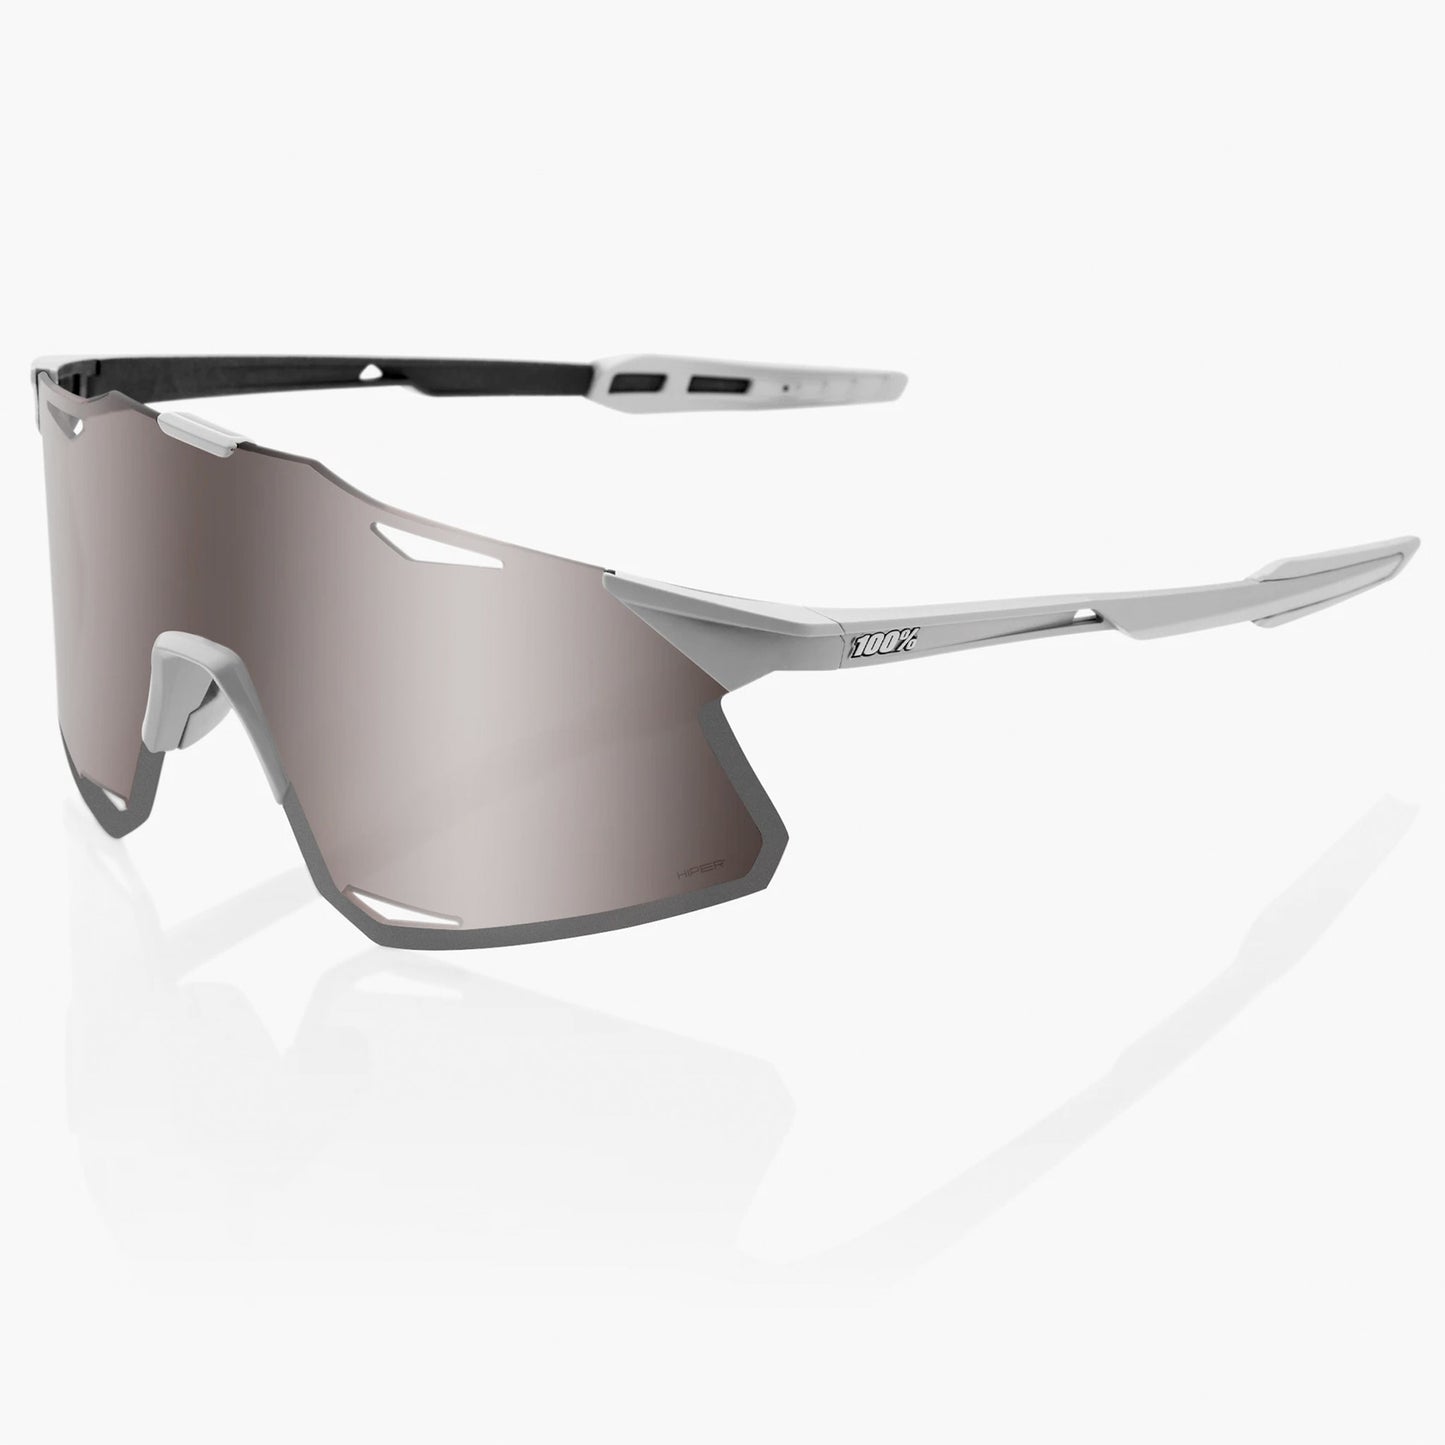 100% Hypercraft Cycling Sunglasses - Matte Stone Grey with Hiper Silver Mirror Lens + Clear Lens, Woolys Wheels